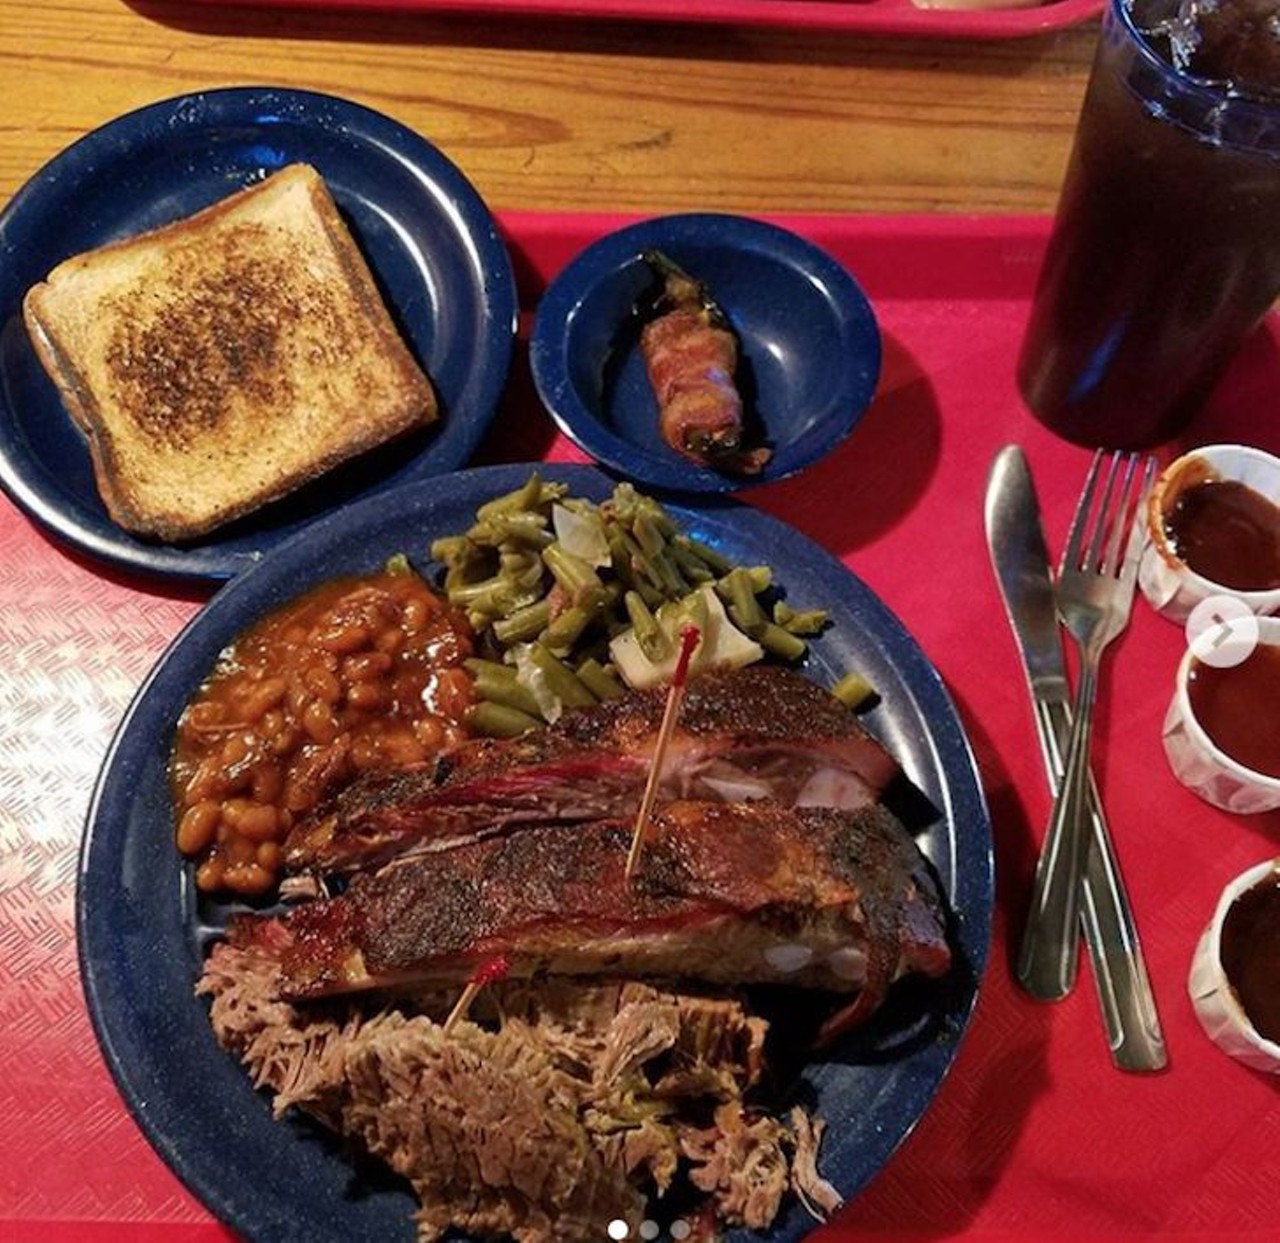 Try this: Ribs, brisket, baked beans, green beans, Texas toast, jalapeno popper. That&#146;s one heavy tray. When you get to scoop your own sides, things can get out of hand quickly.
Photo via trickydicky71